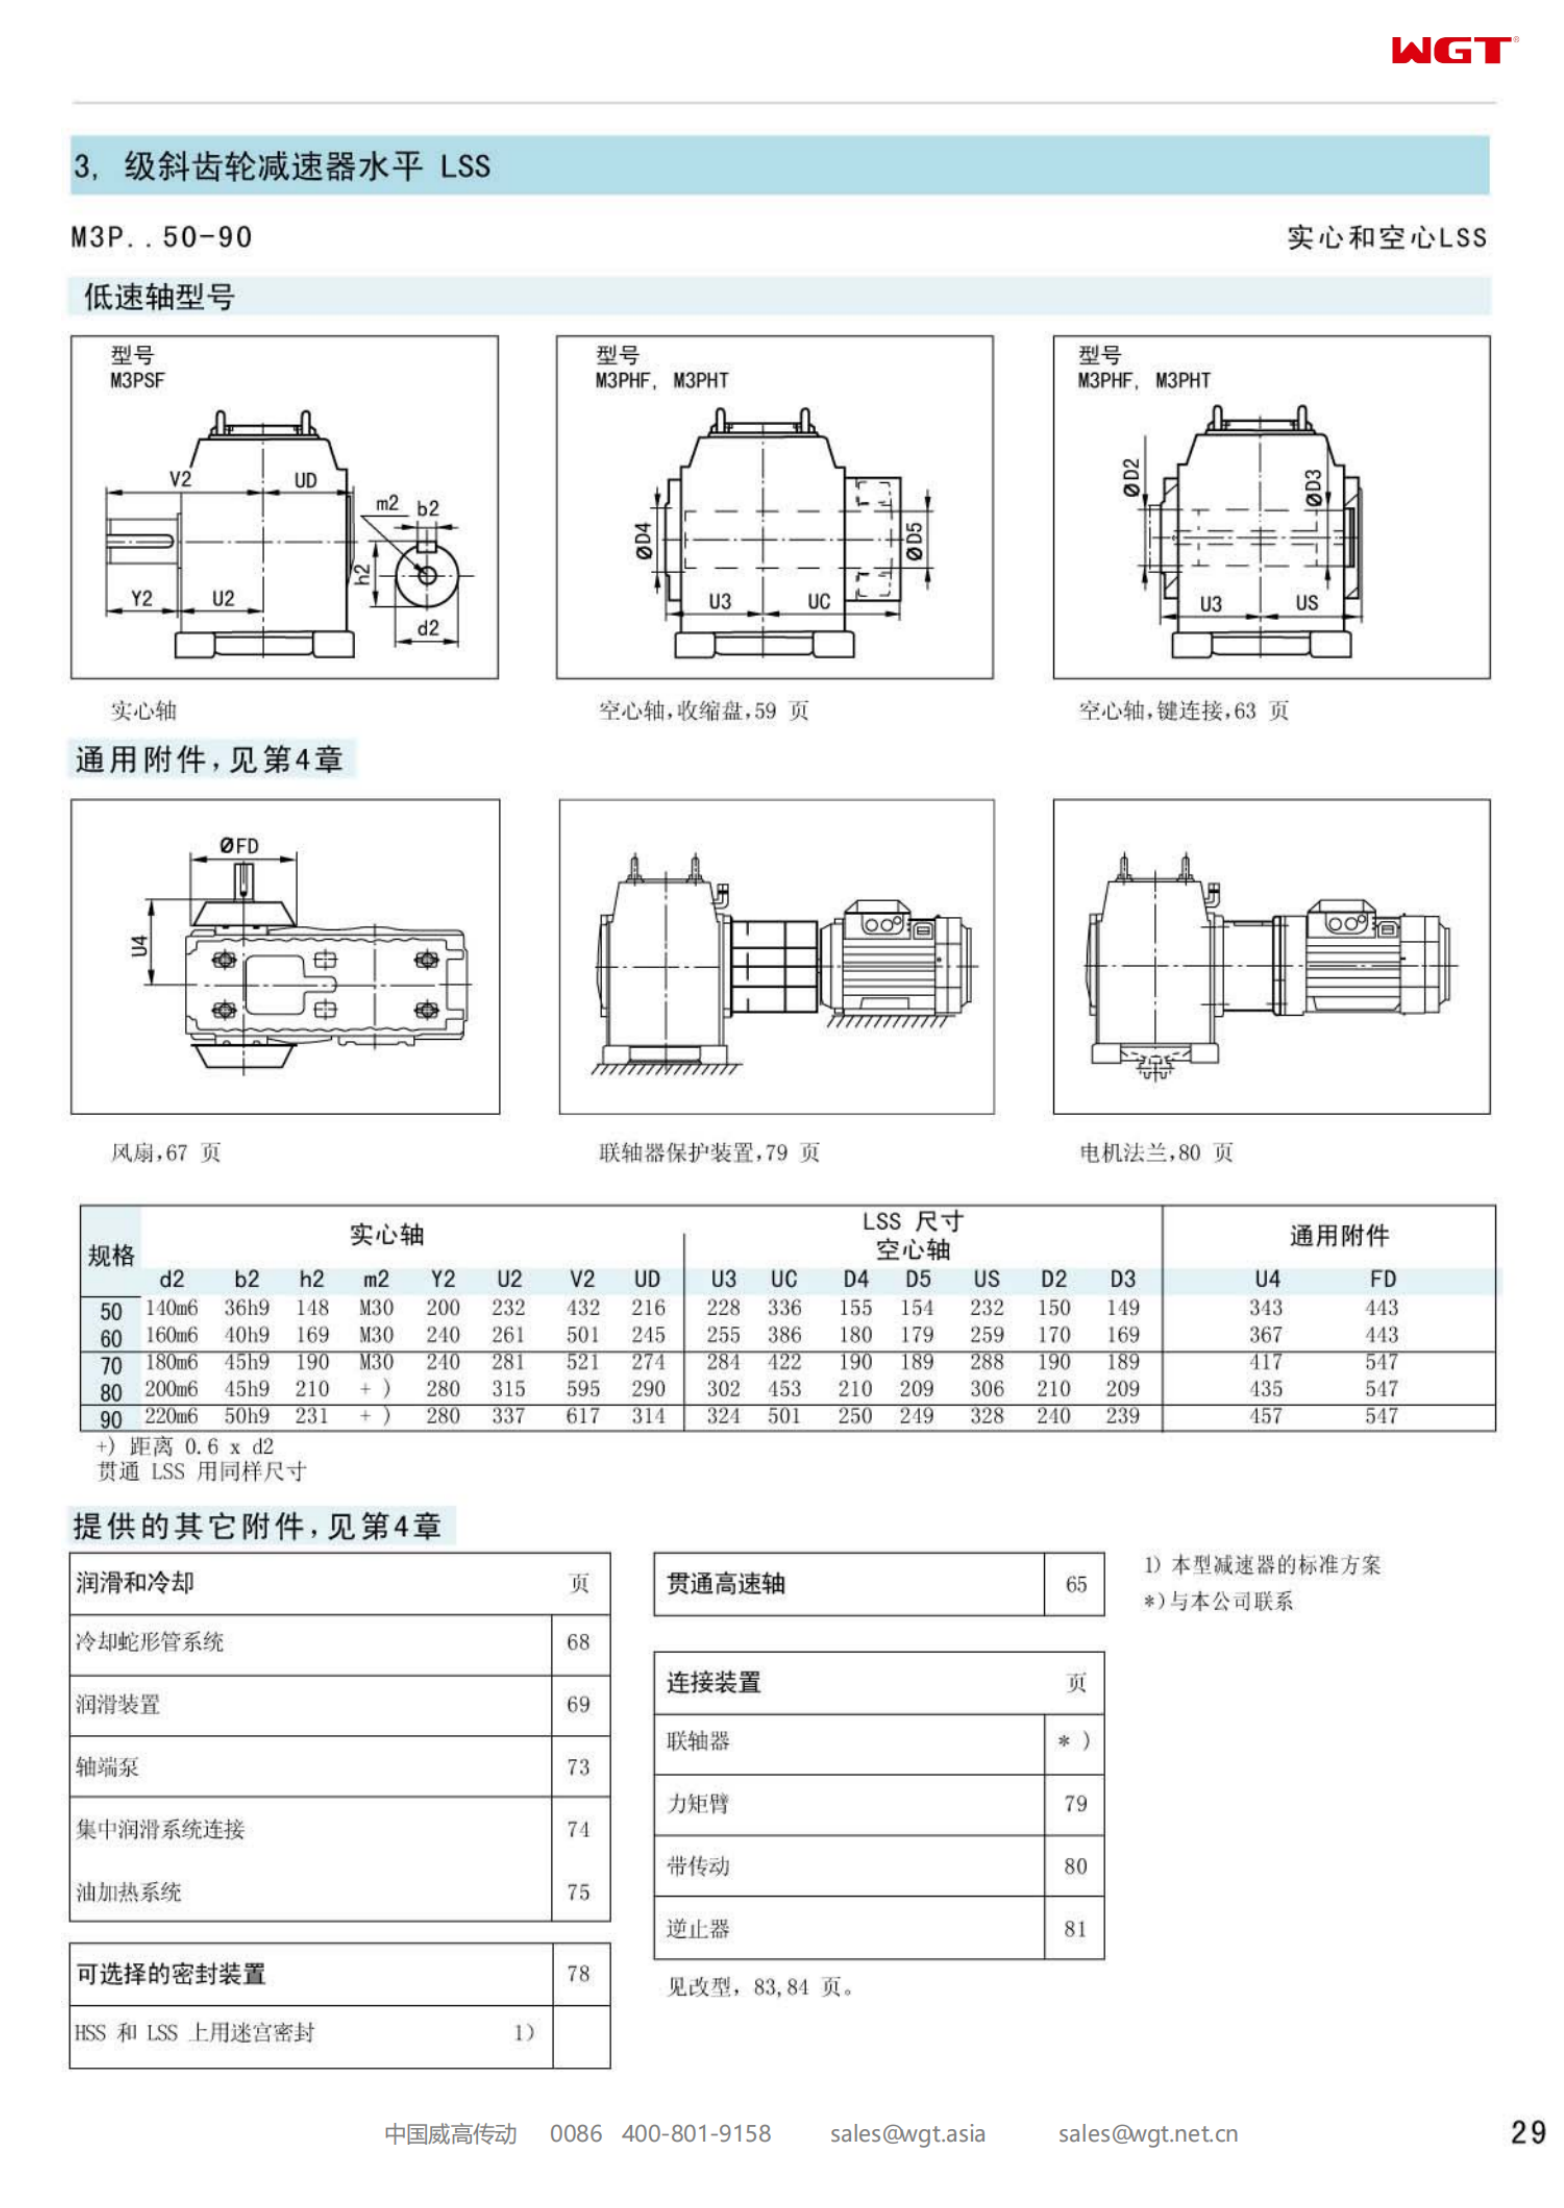 M3PHF70 Replace_SEW_M_Series Gearbox